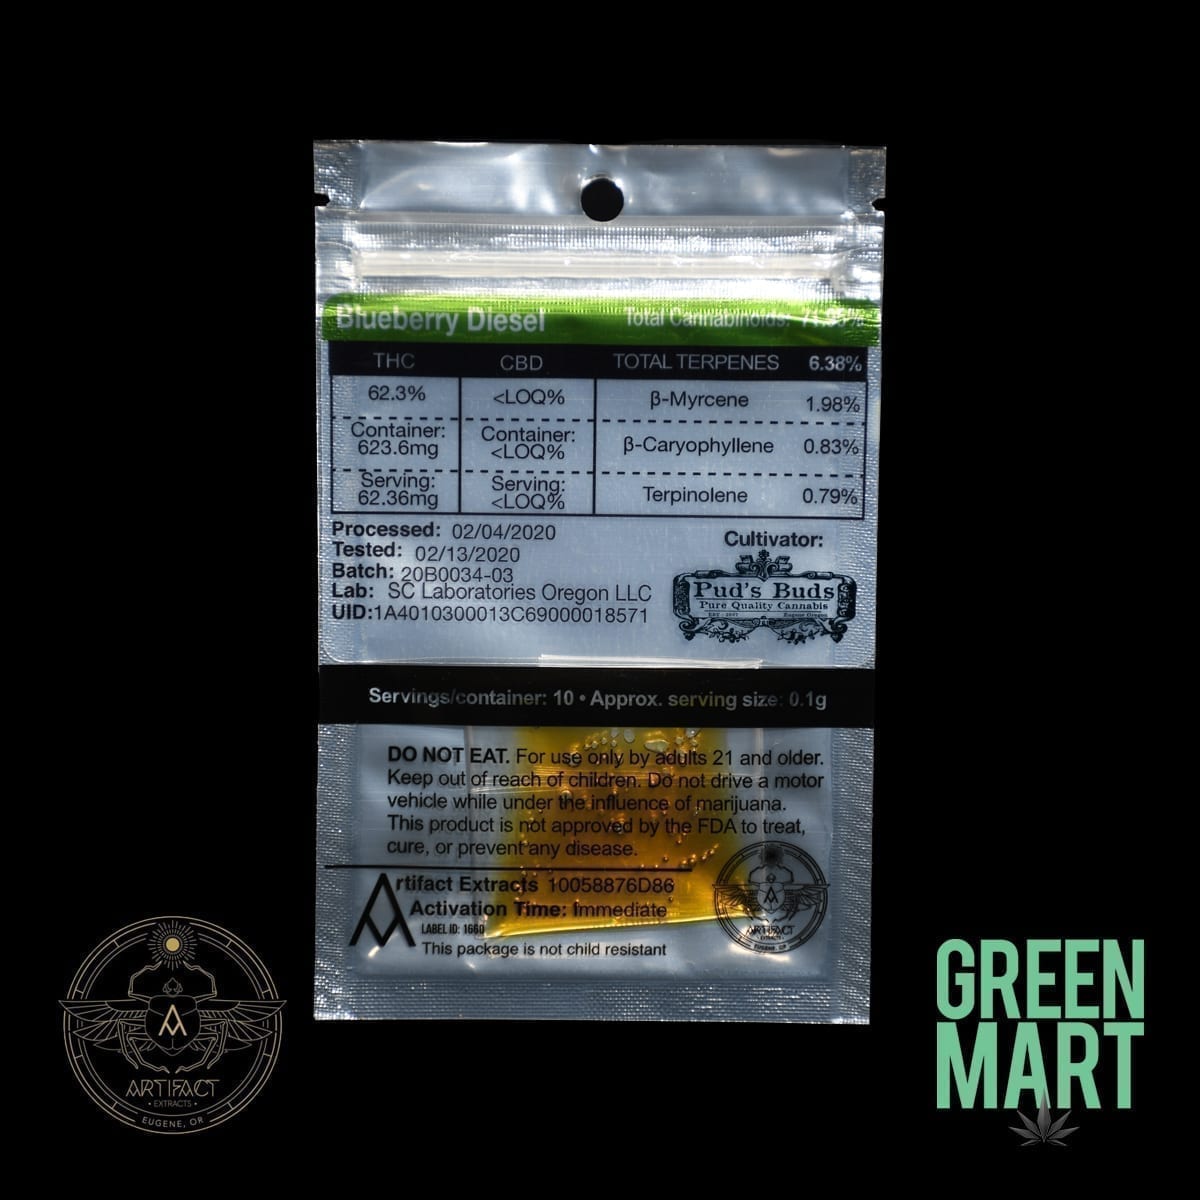 Artifact Extracts - Blueberry Diesel